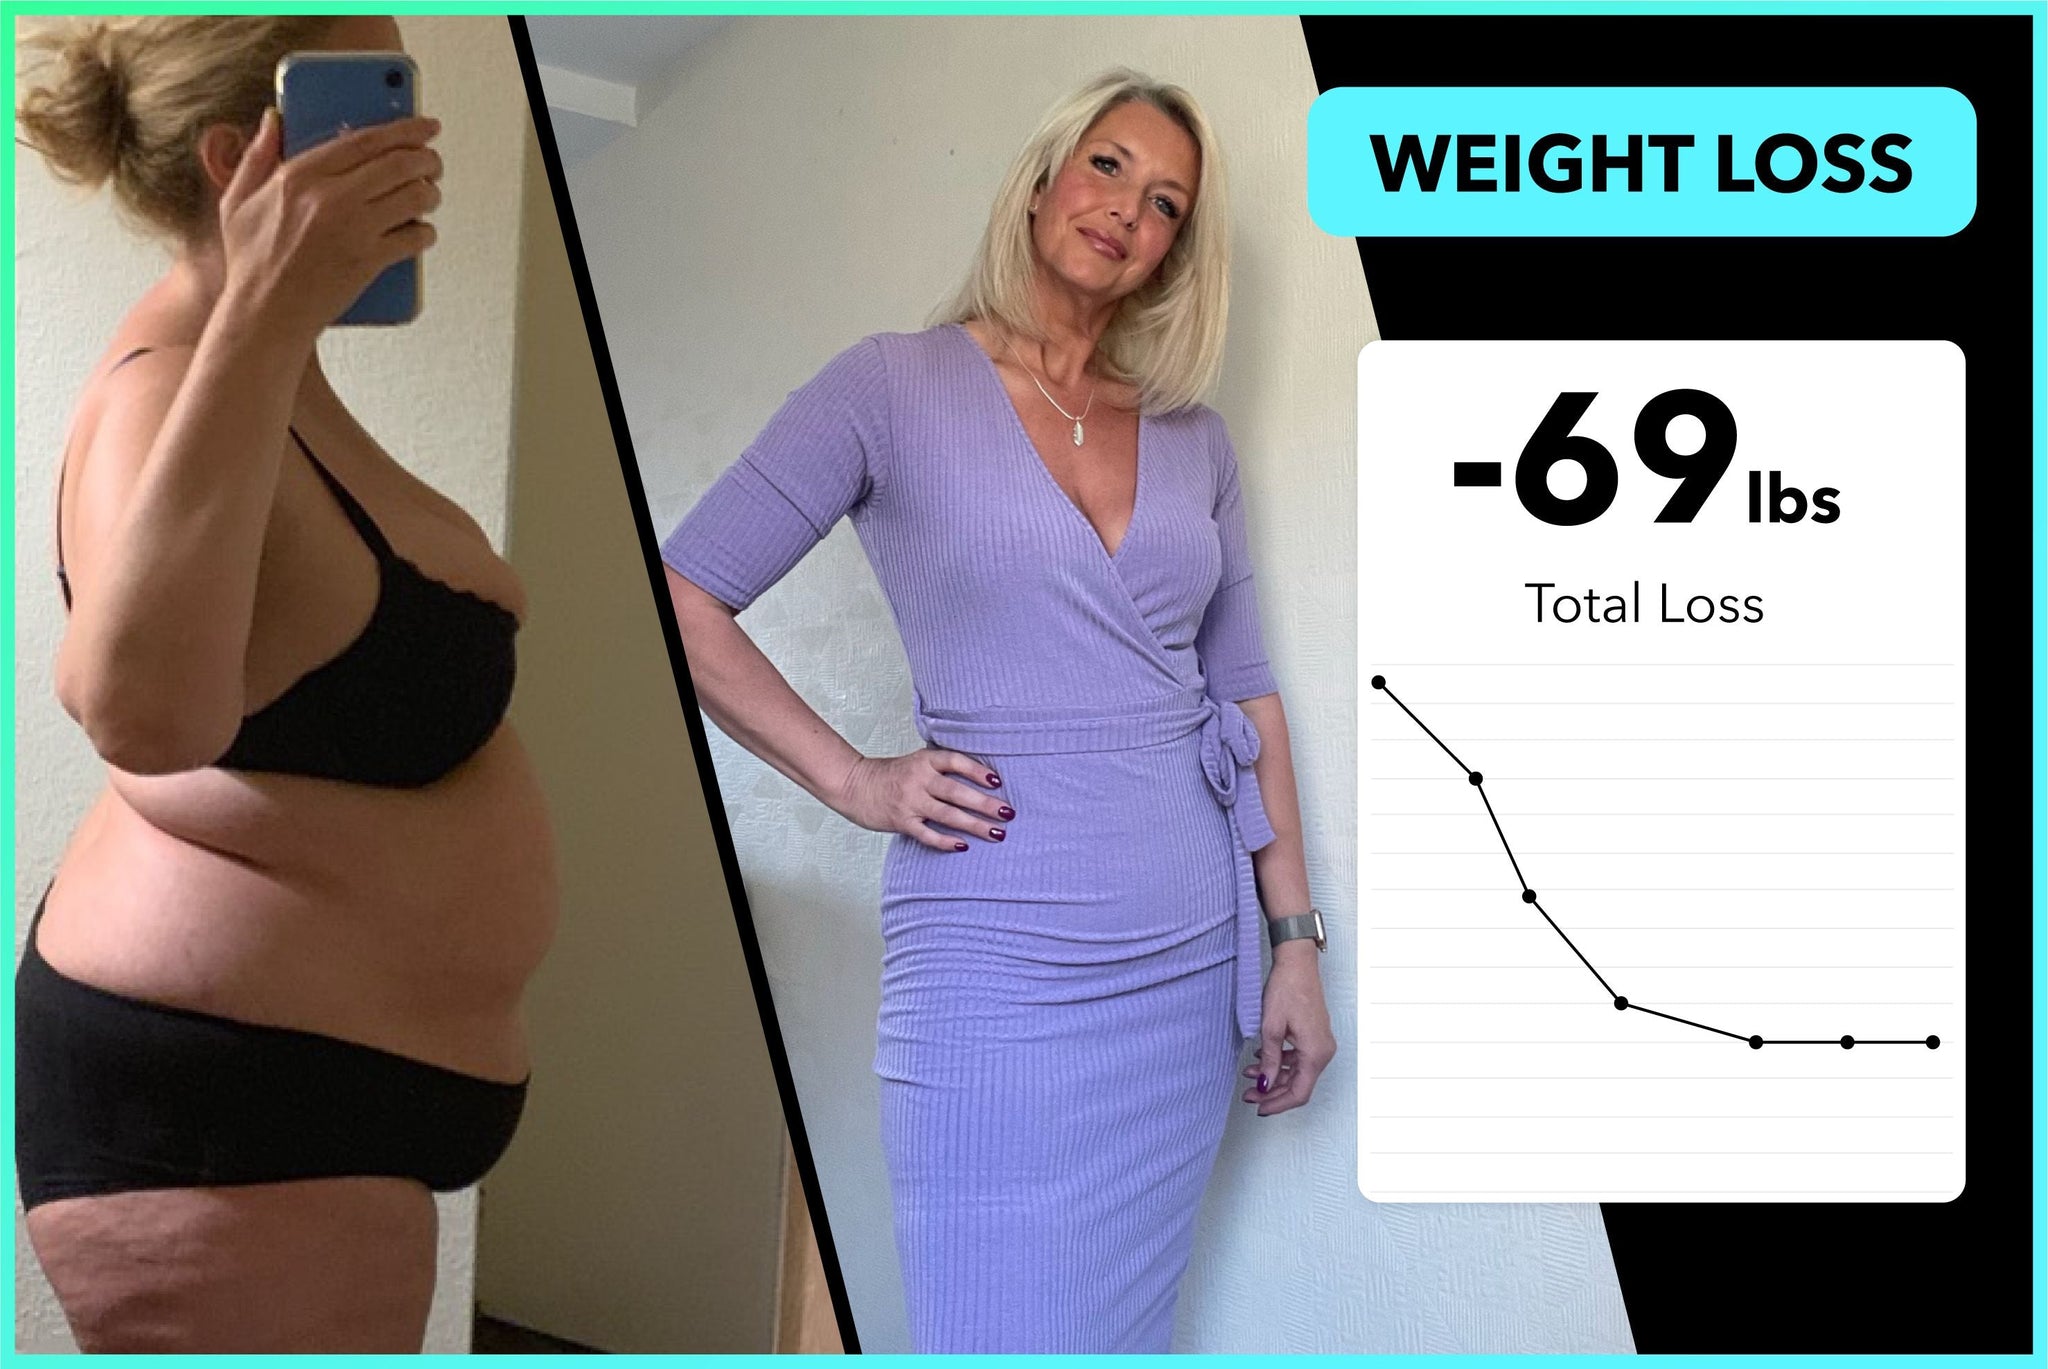 Helen lost 69lbs with Team RH